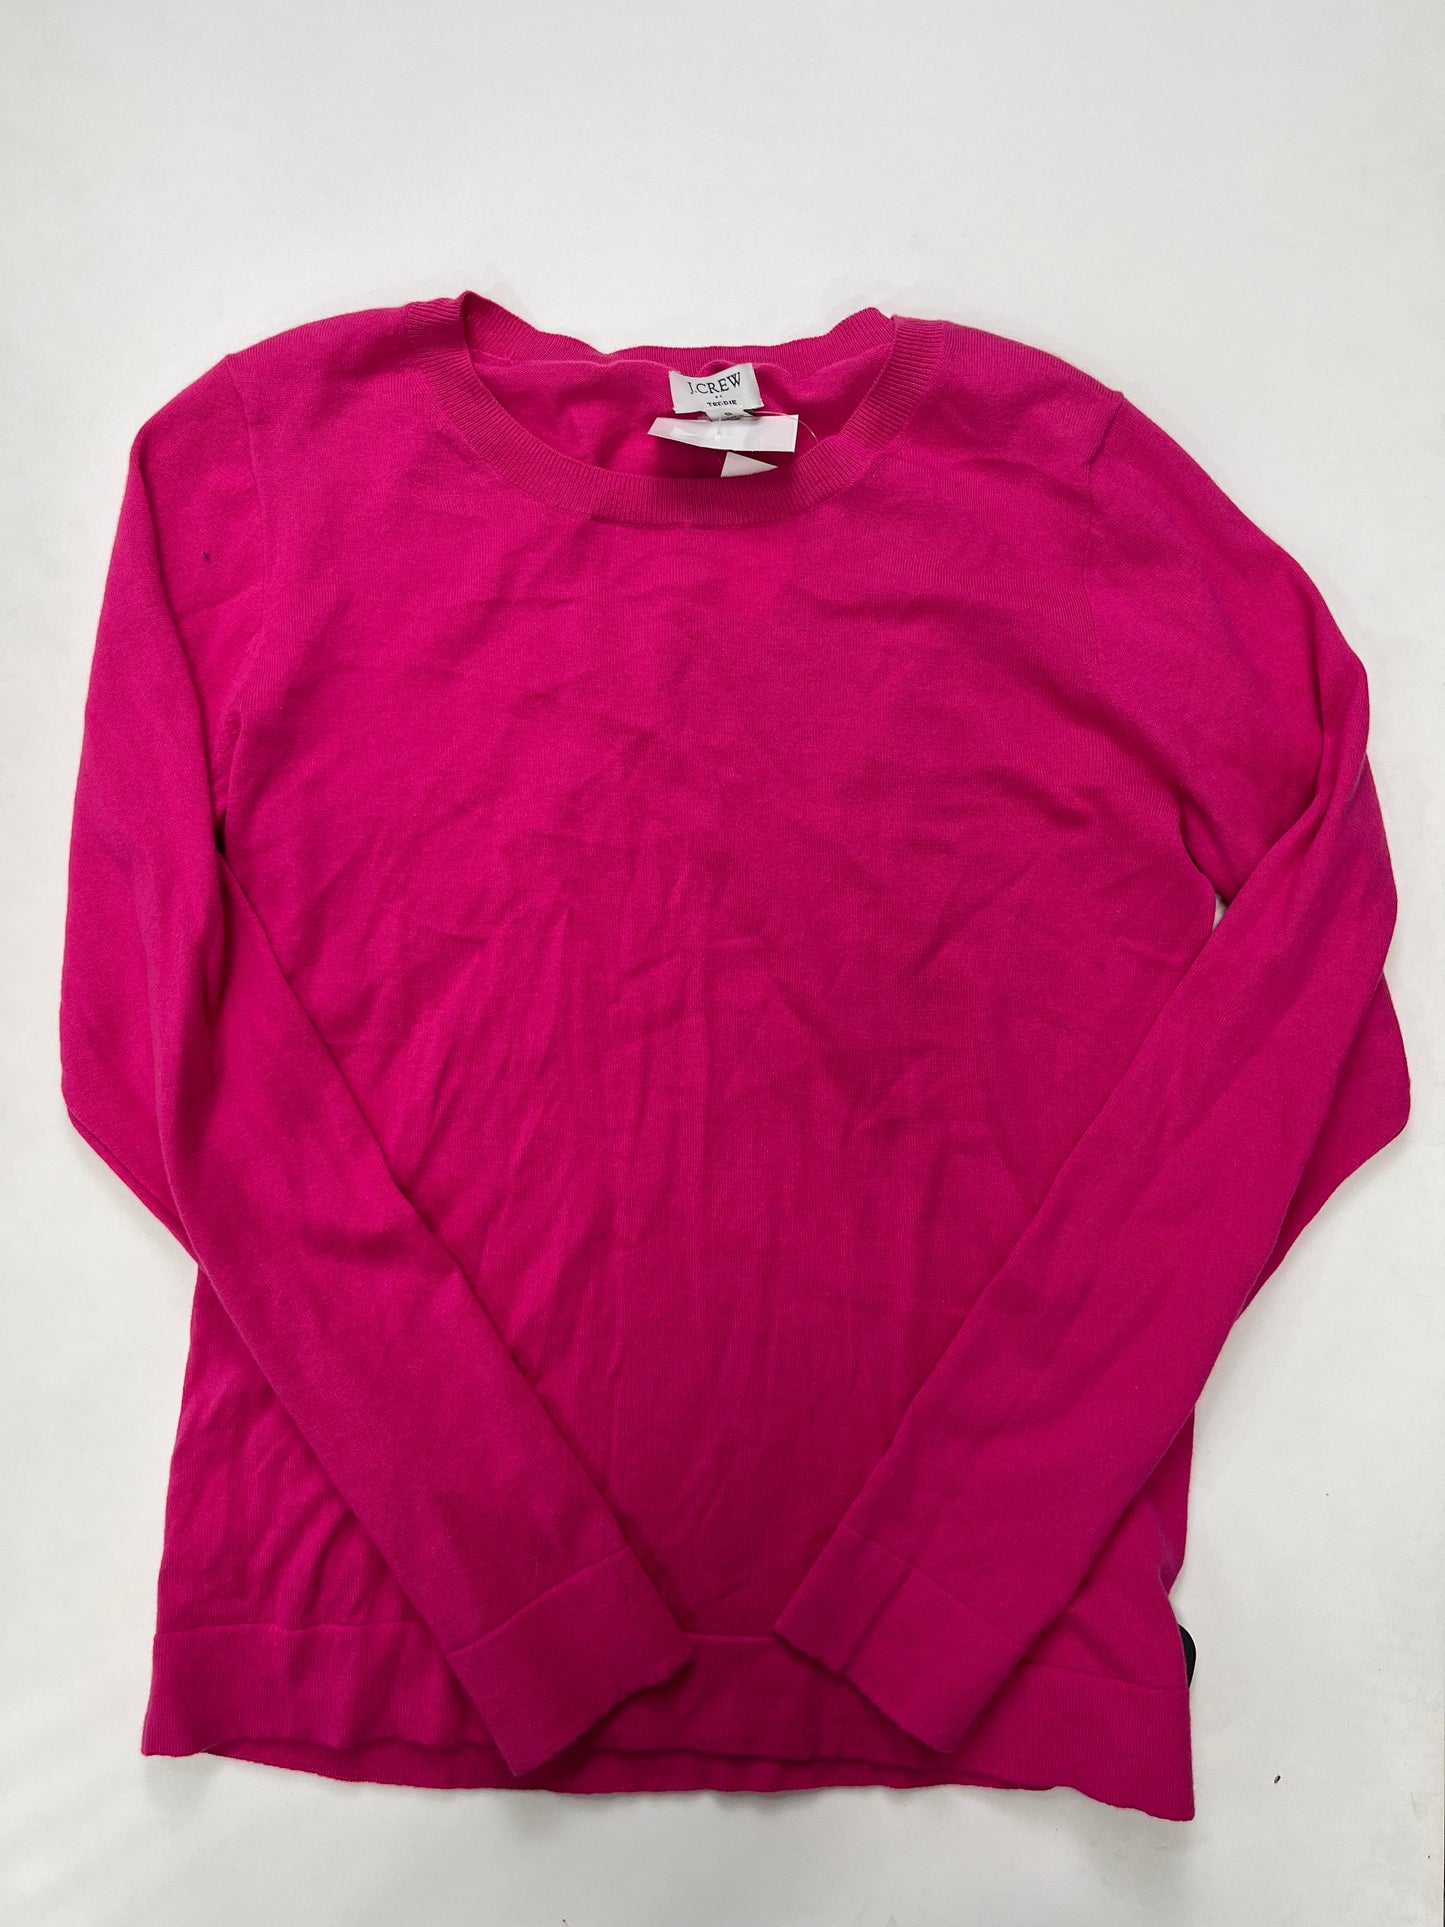 Hot Pink Sweater J Crew, Size S